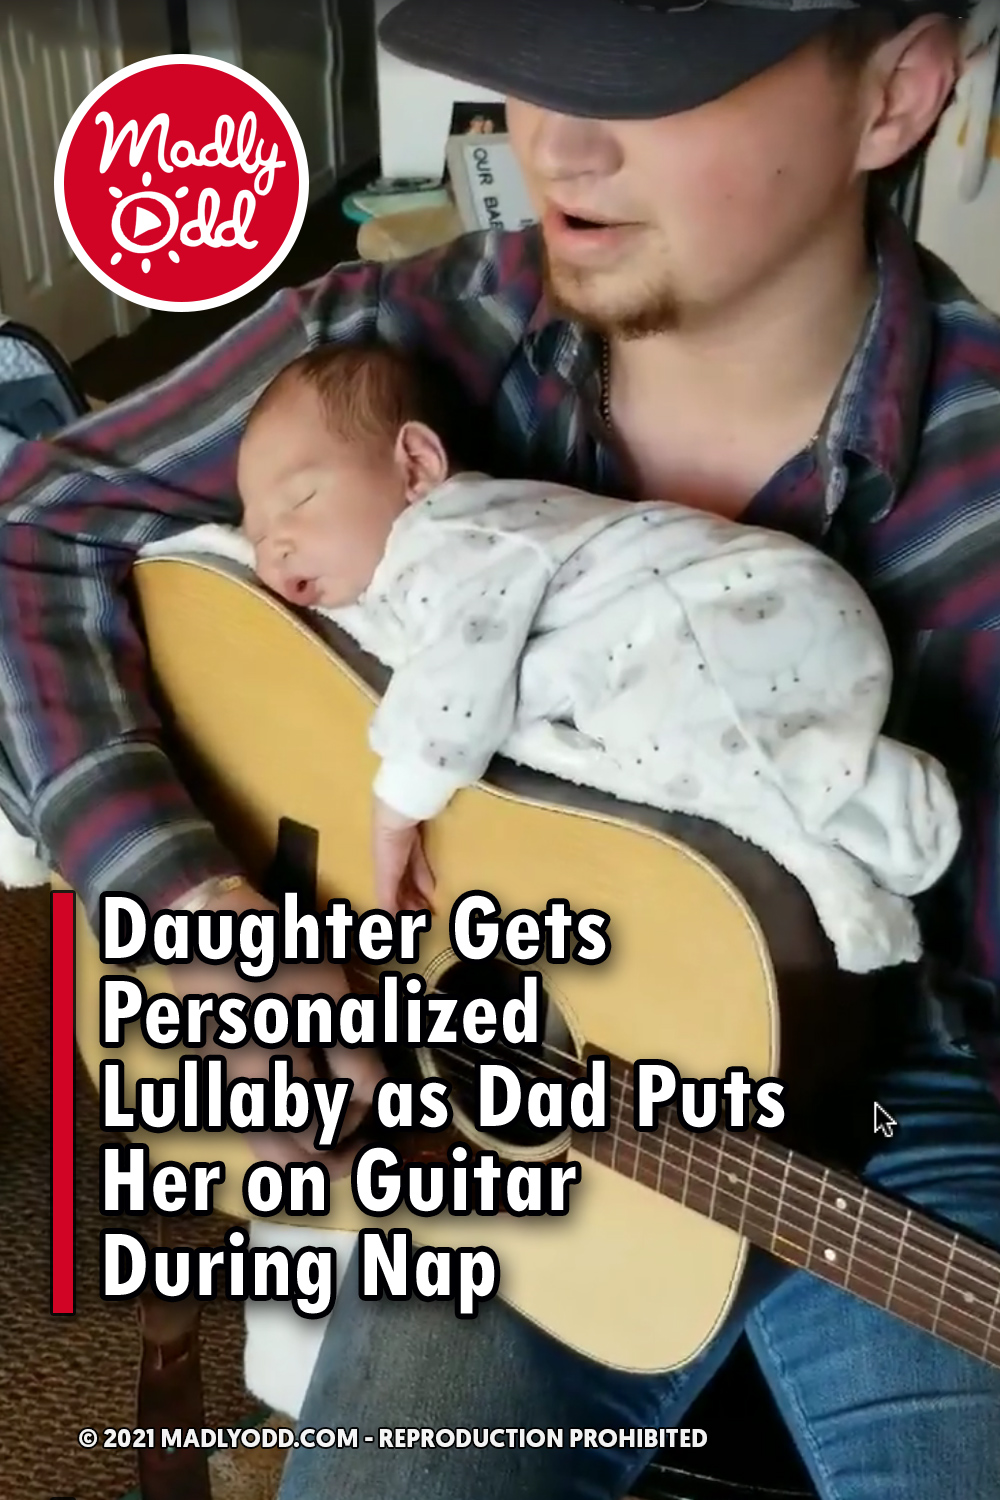 Daughter Gets Personalized Lullaby as Dad Puts Her on Guitar During Nap